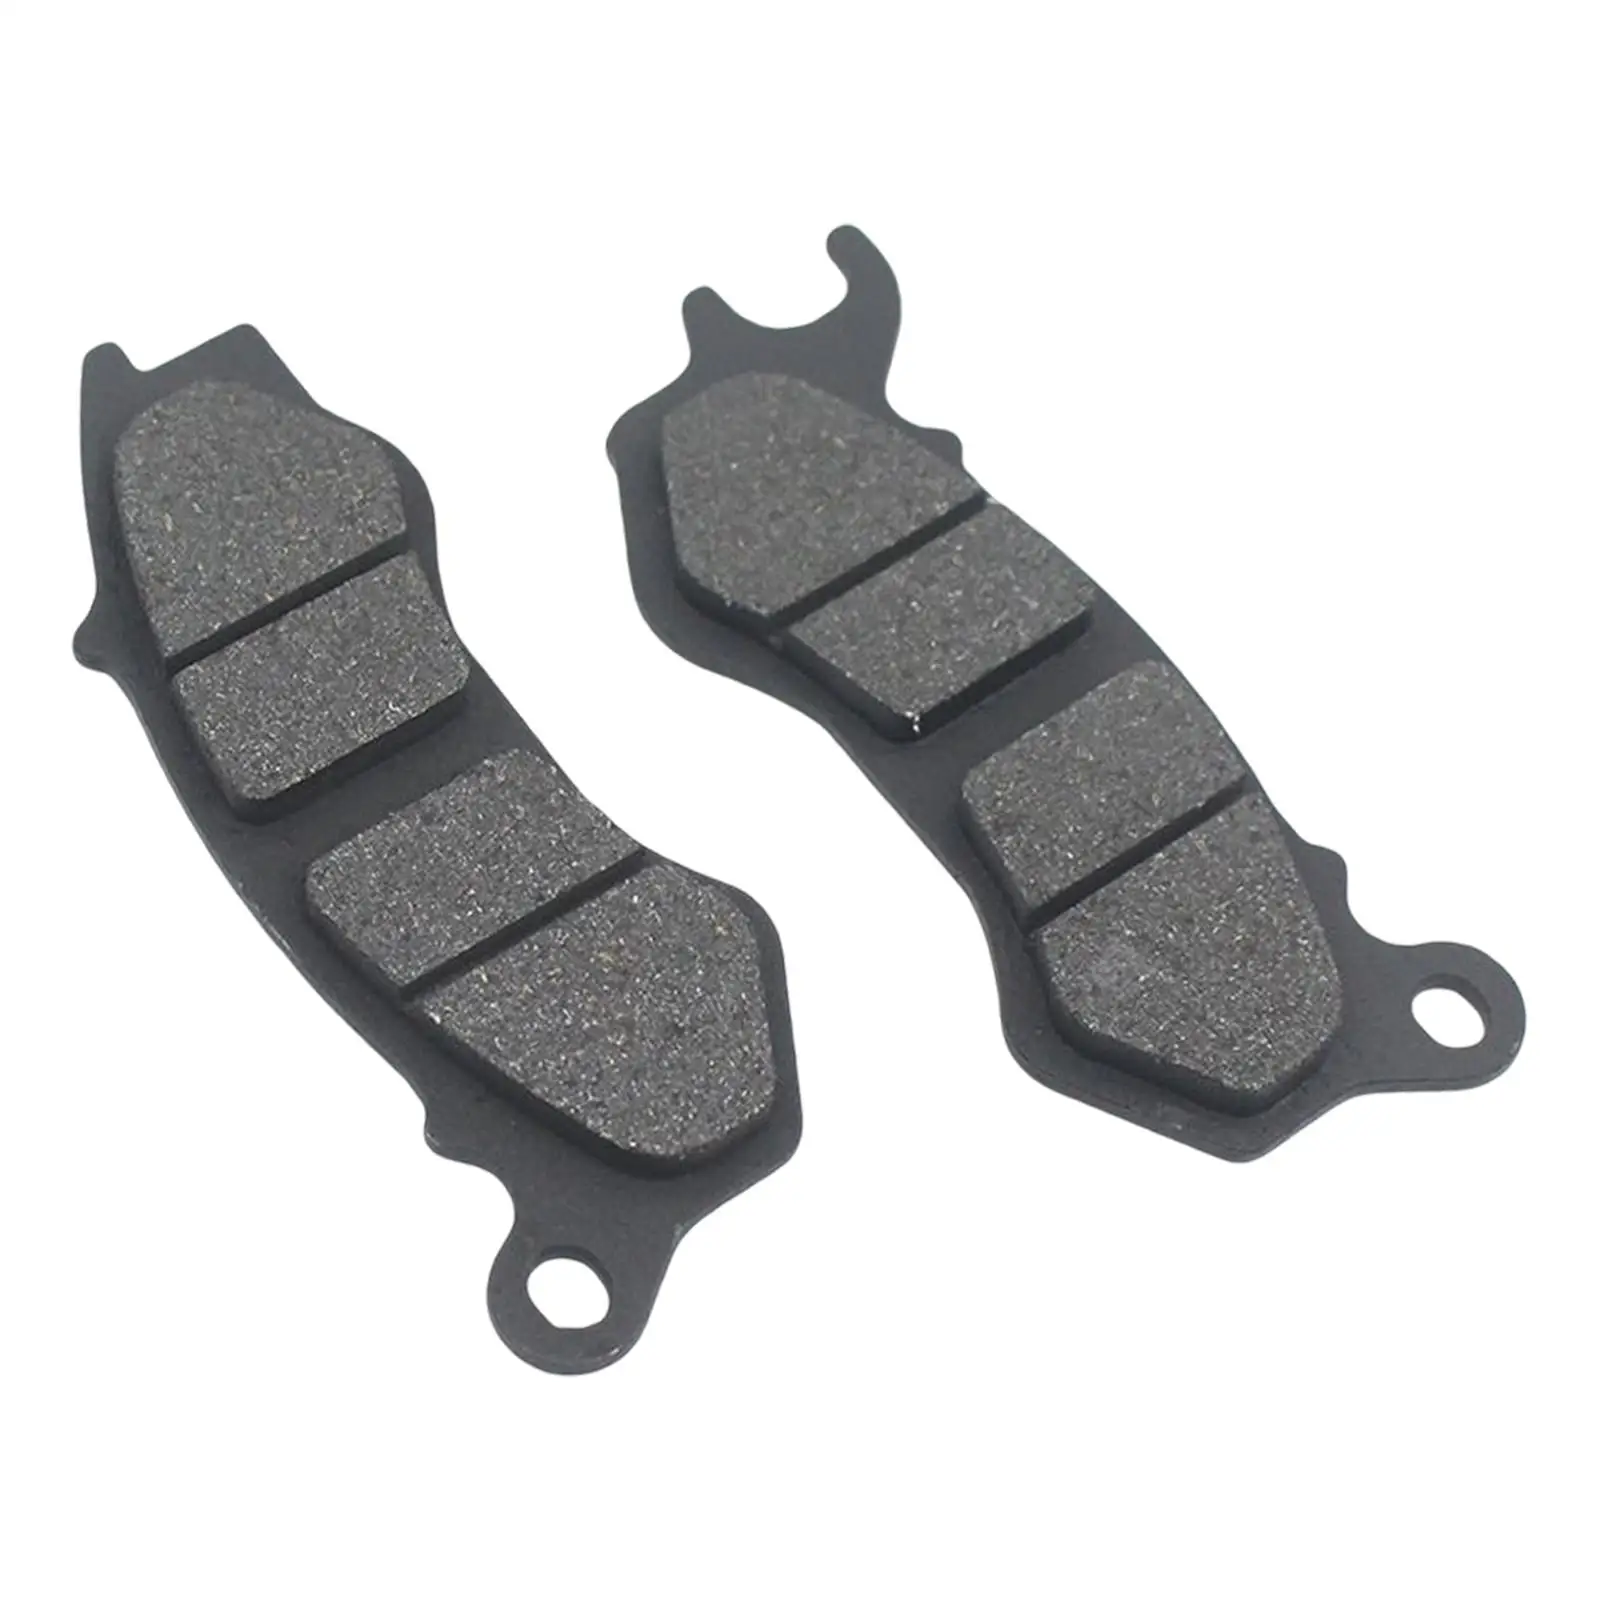 Front Brake Pads for Honda PCX 125 150 - High-Quality Wood Material, Eas... - £16.28 GBP